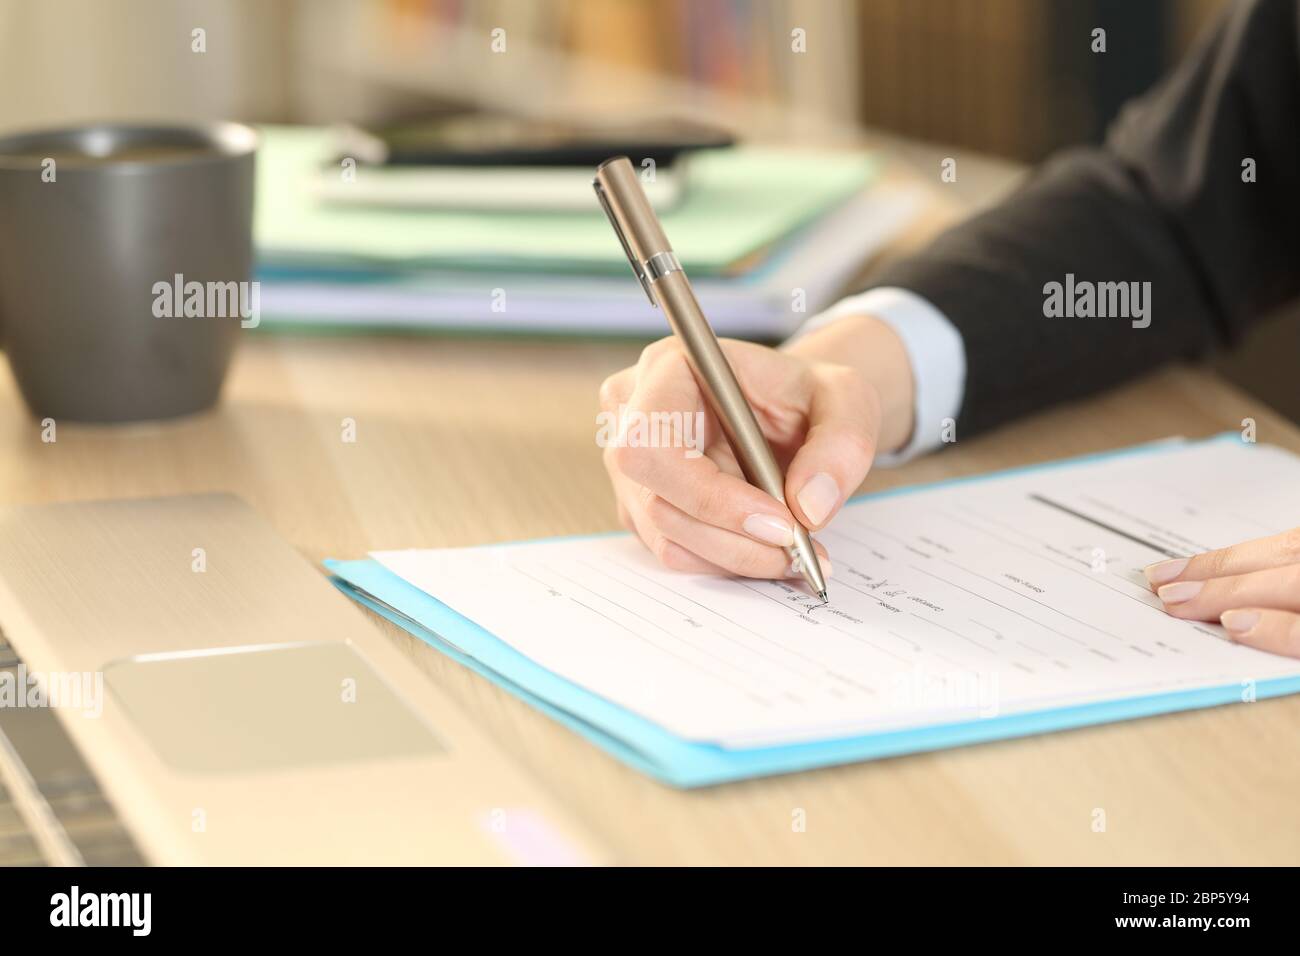 Close up of entrepreneur woman hands filling out checkbox form document sitting on a desk at home office Stock Photo